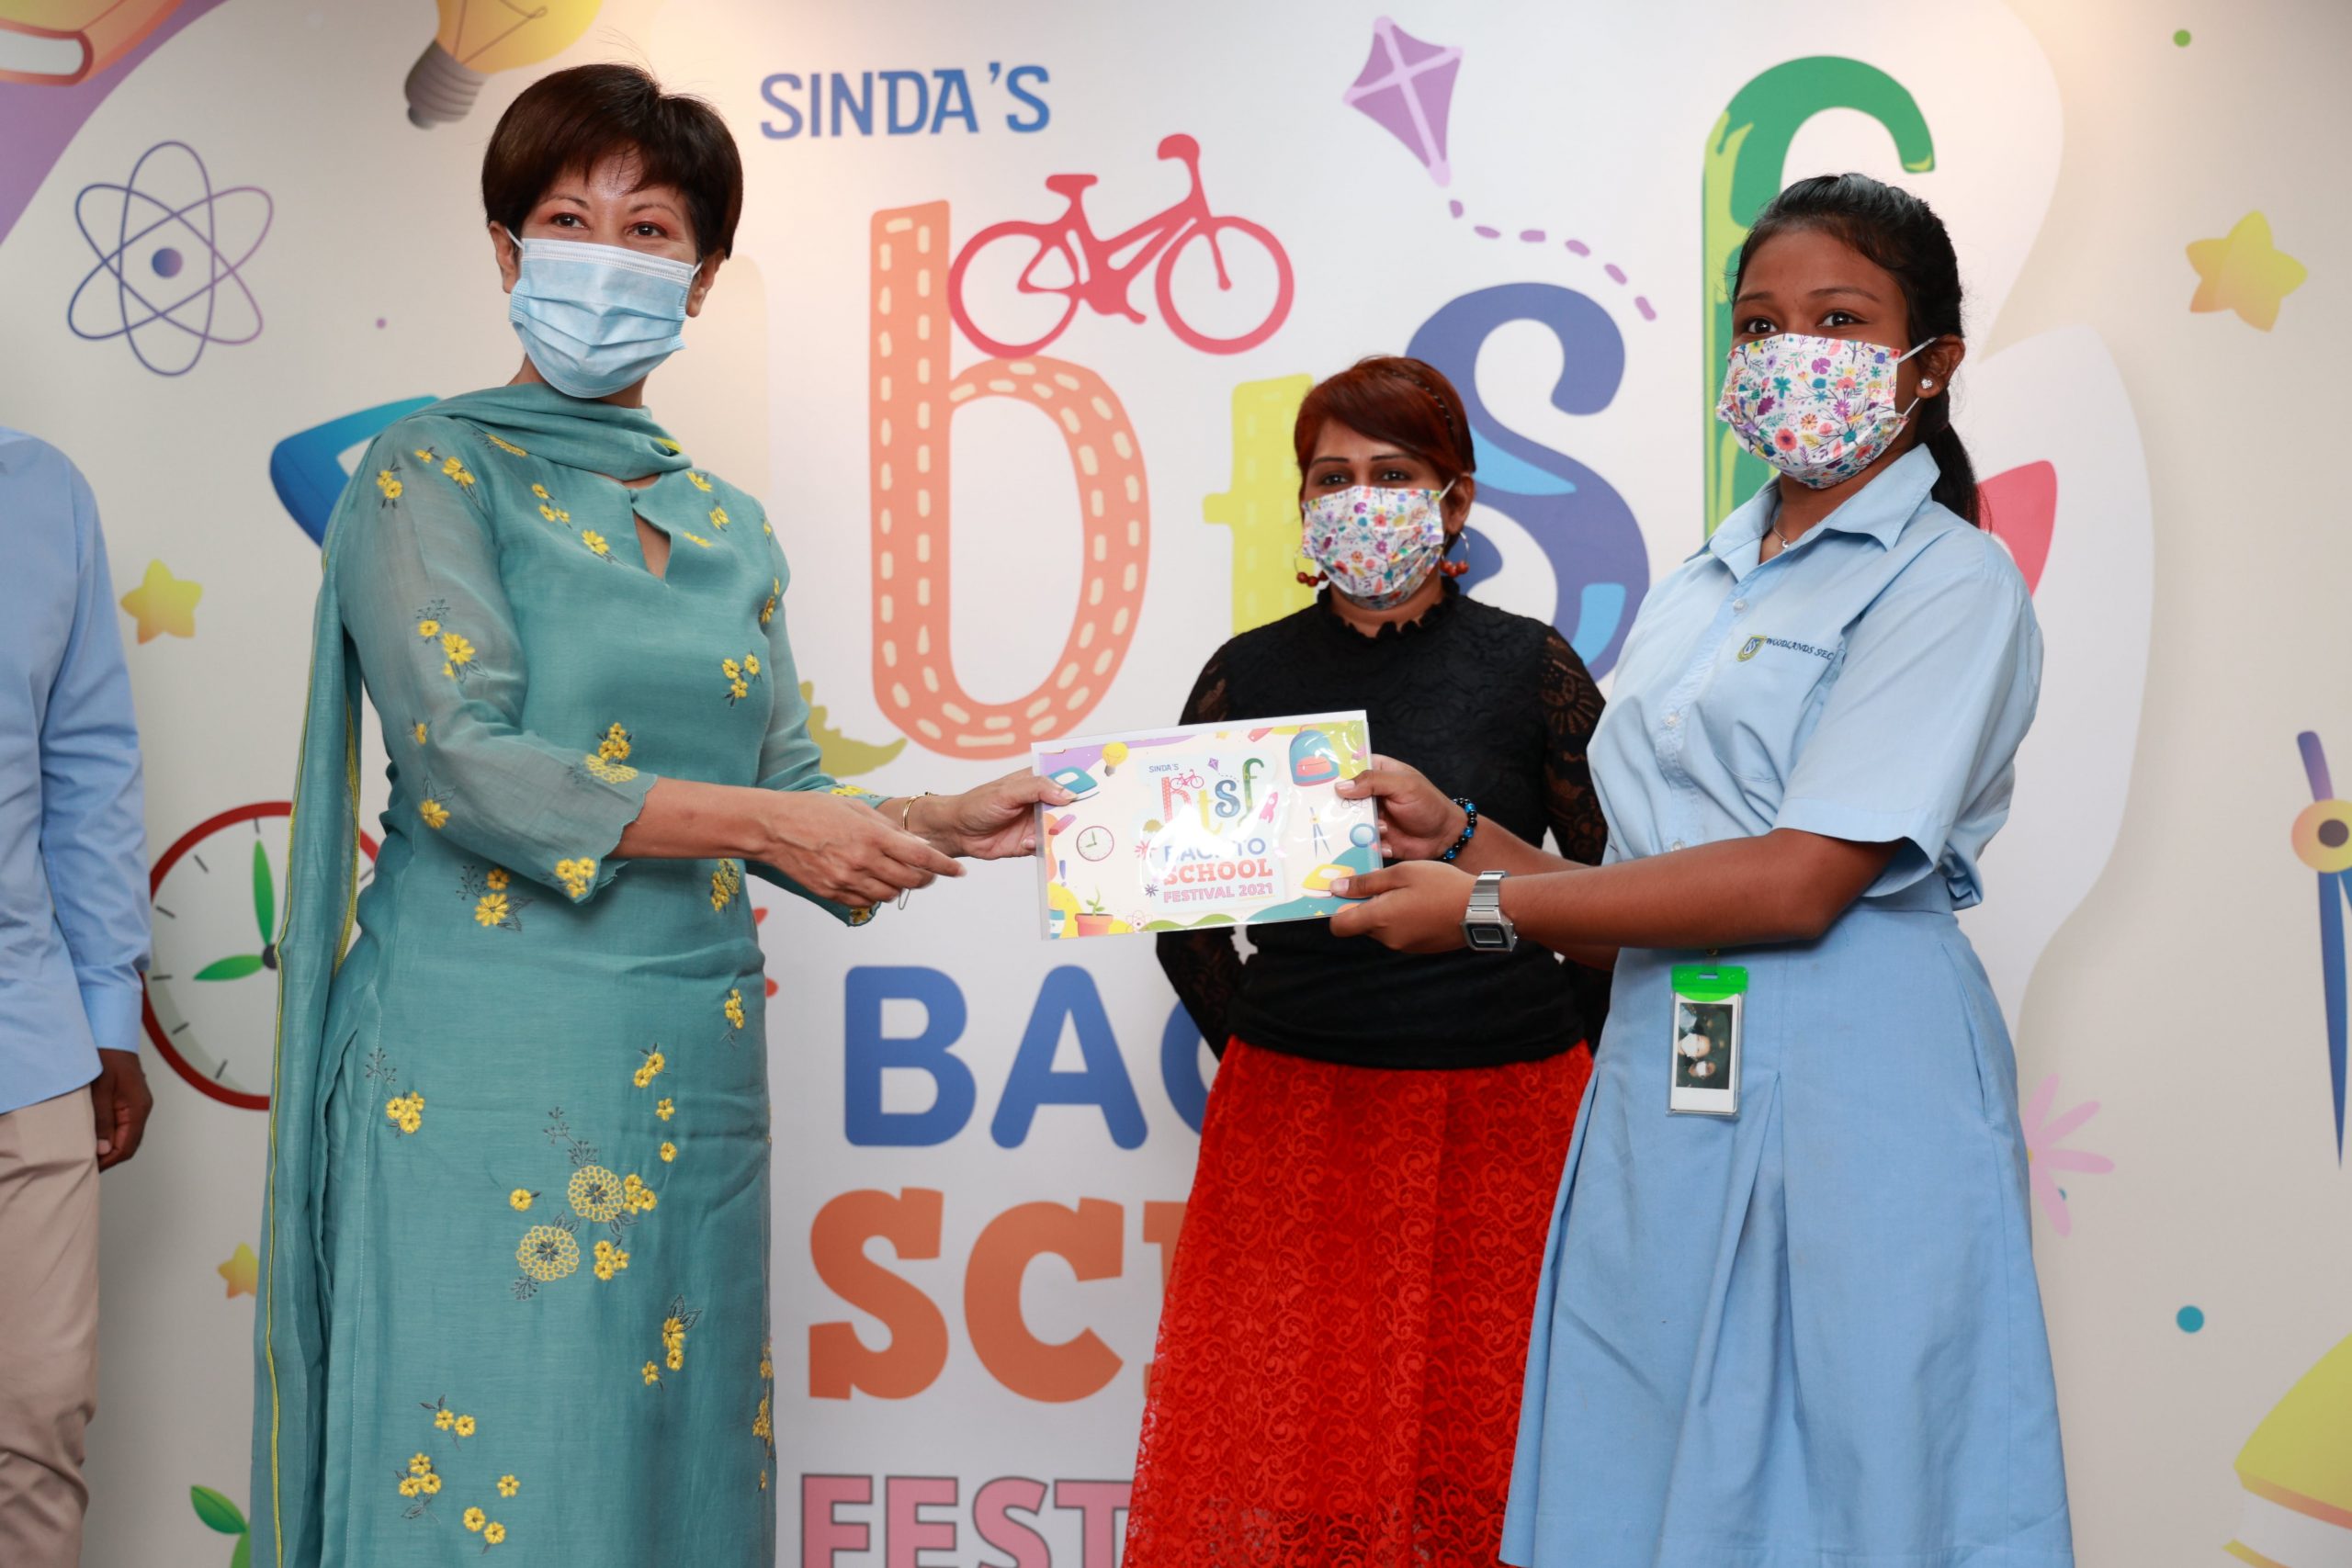 Prisca, 14 (right), from Woodlands Secondary School, one of 4,200 students who received school festival vouchers from Minister Indranee Rajah.